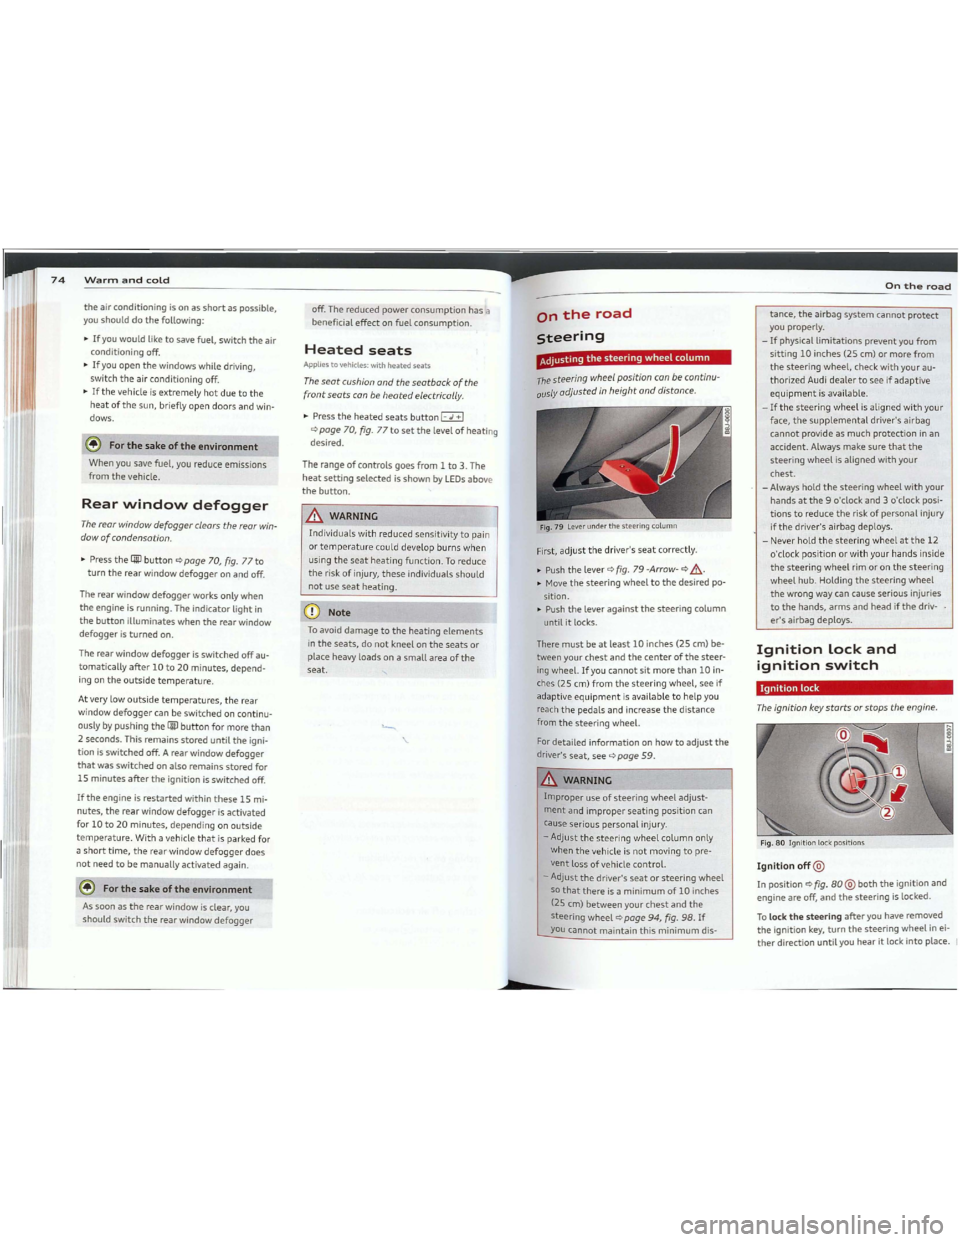 AUDI TT 2012  Owners Manual Downloaded from www.Manualslib.com manuals search engine Ontheroad
--
-
tance,theairbagsystemcannotprotect
youproperly.
-
Ifphysicallimitationspreventyou from
sitting10inches(25cm) ormorefrom
thesteer